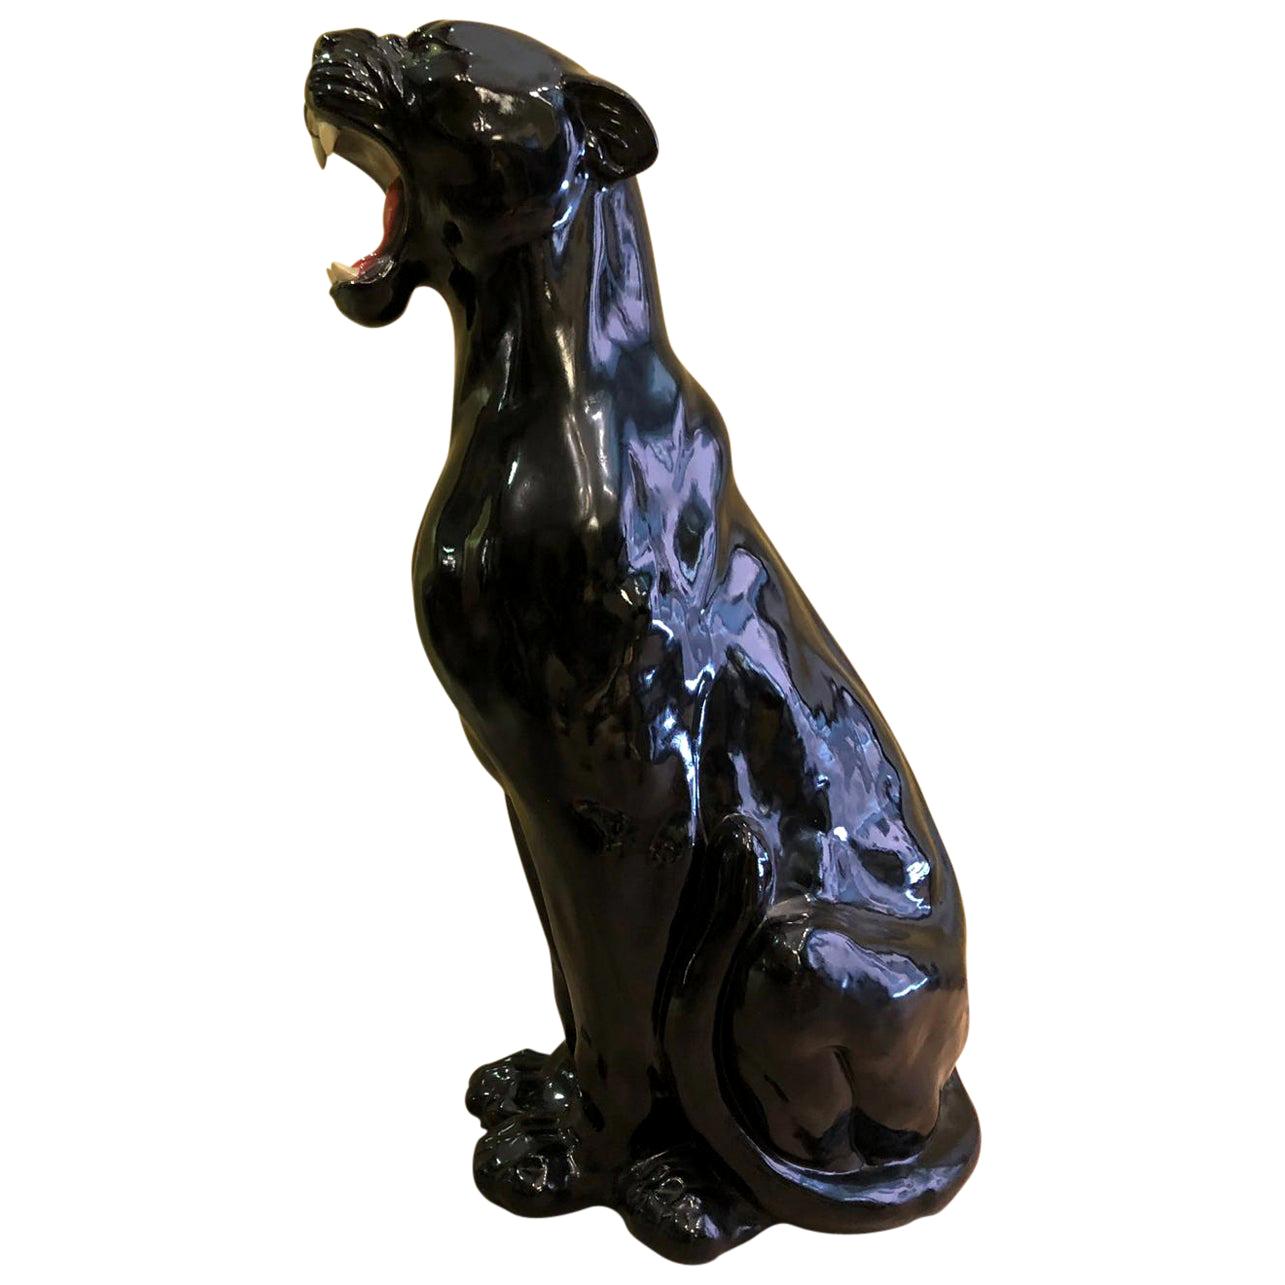 Animalier Roaring Black Shiny Ceramic Panther Sculpture from Italy from  1980s at 1stDibs